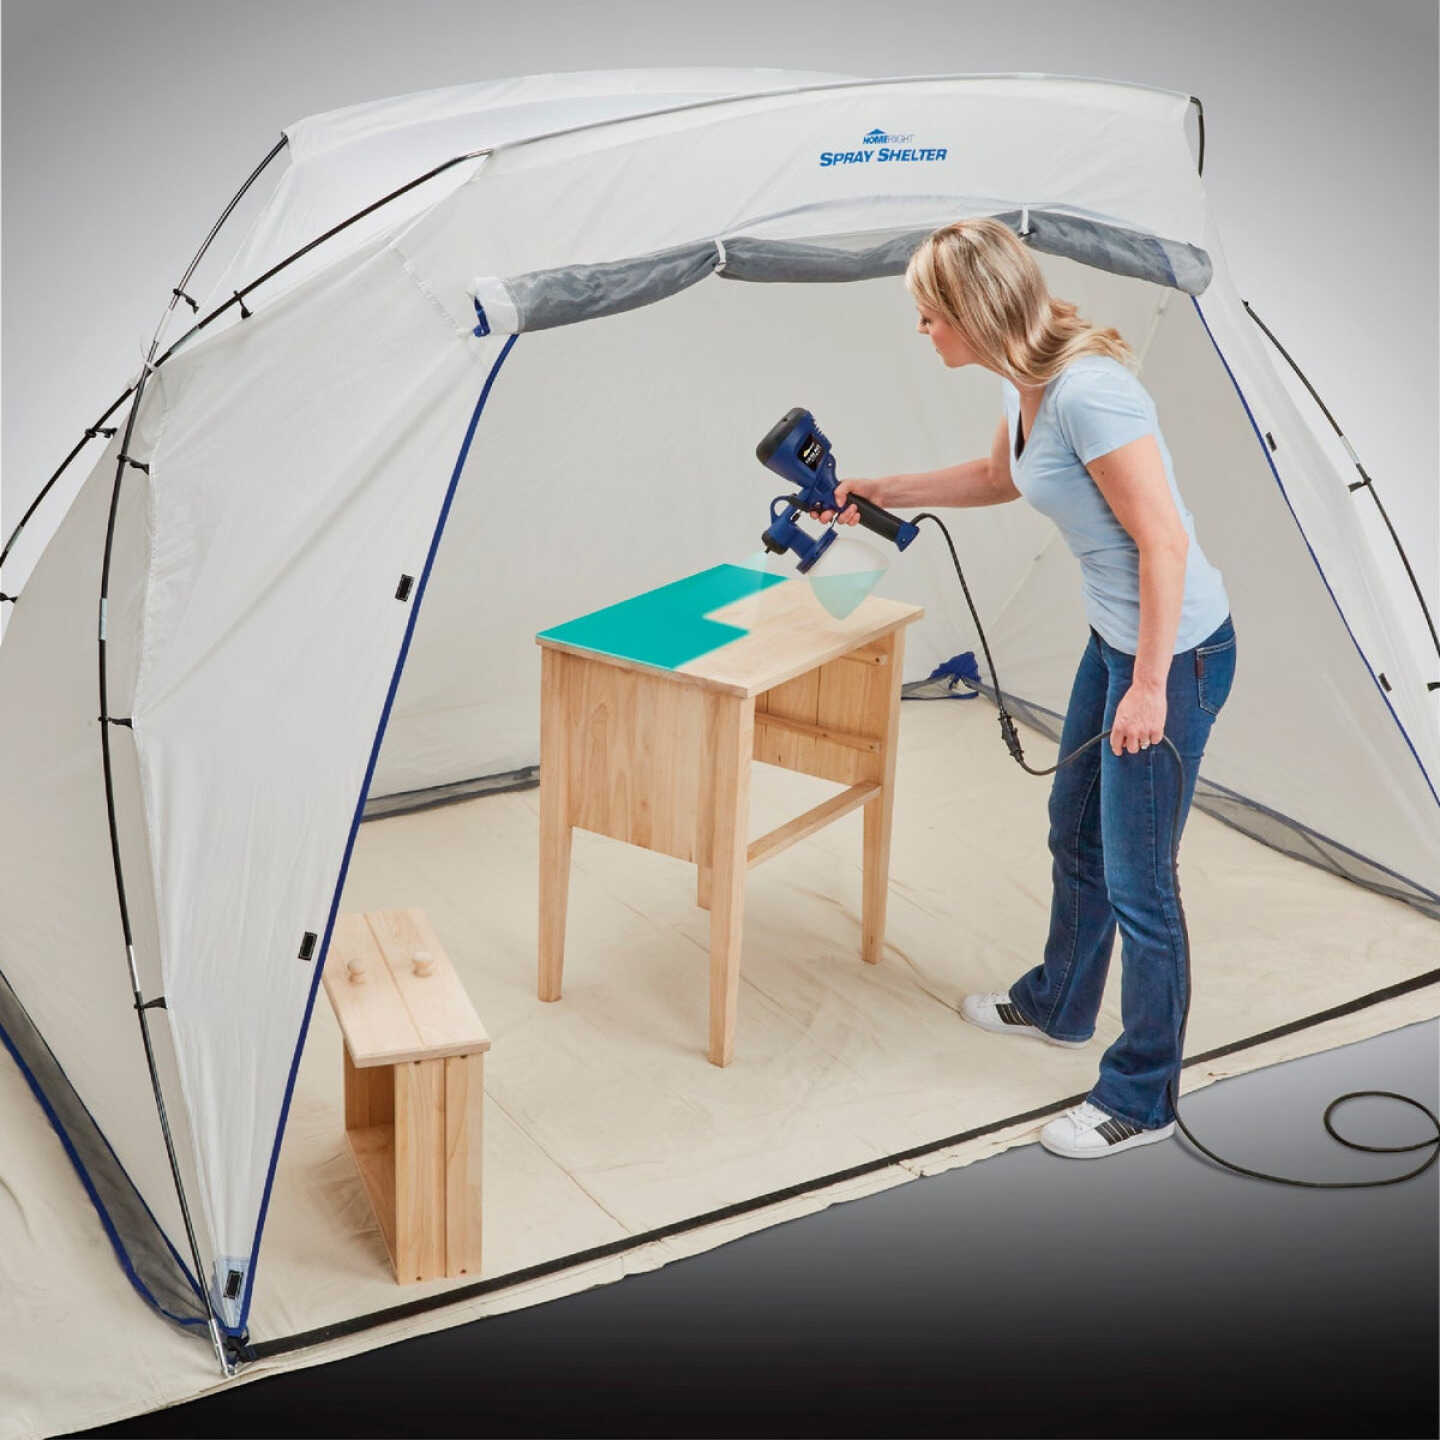 Wagner 9 Ft. W x 5.5 Ft. H x 6 Ft. D Large Portable Spray Shelter - Power  Townsend Company